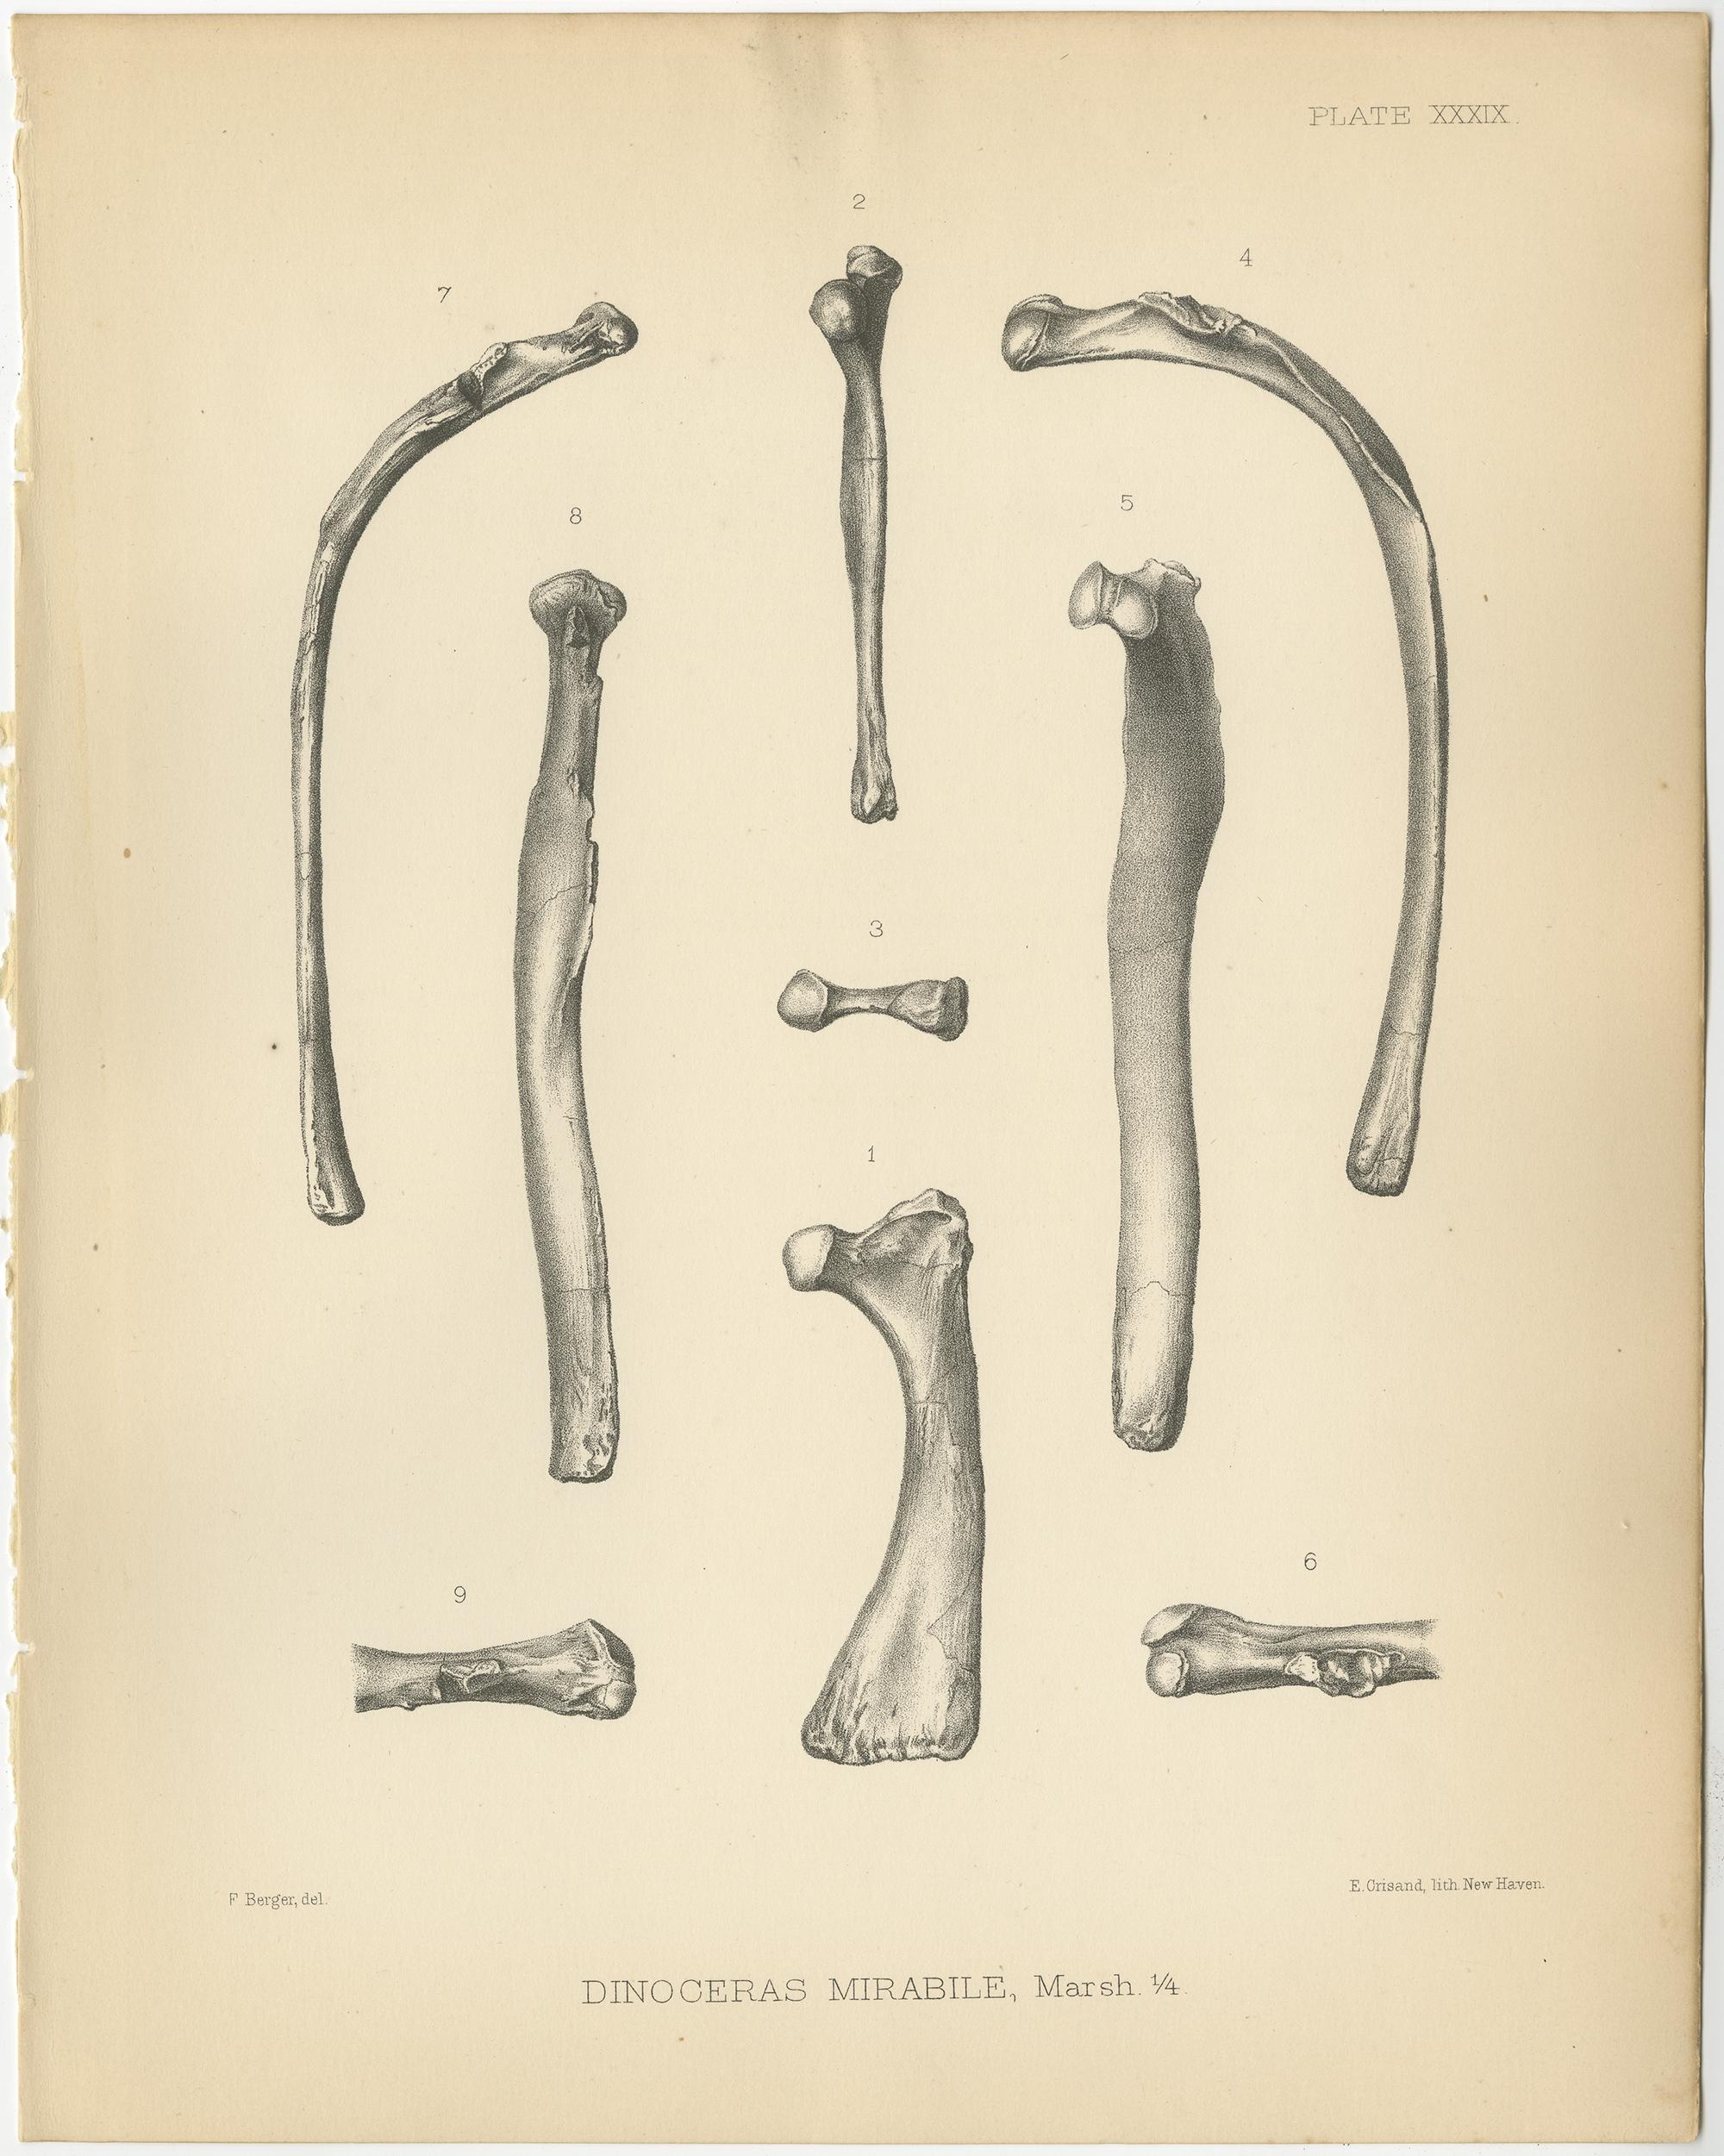 Set of two antique prints titled 'Dinoceras Mirabile'. Original lithograph of the ribs and sternum of a Dinoceras Mirabile, an extinct genus of herbivorous mammal. This print originates from volume 10 of 'Monographs of the United States Geological